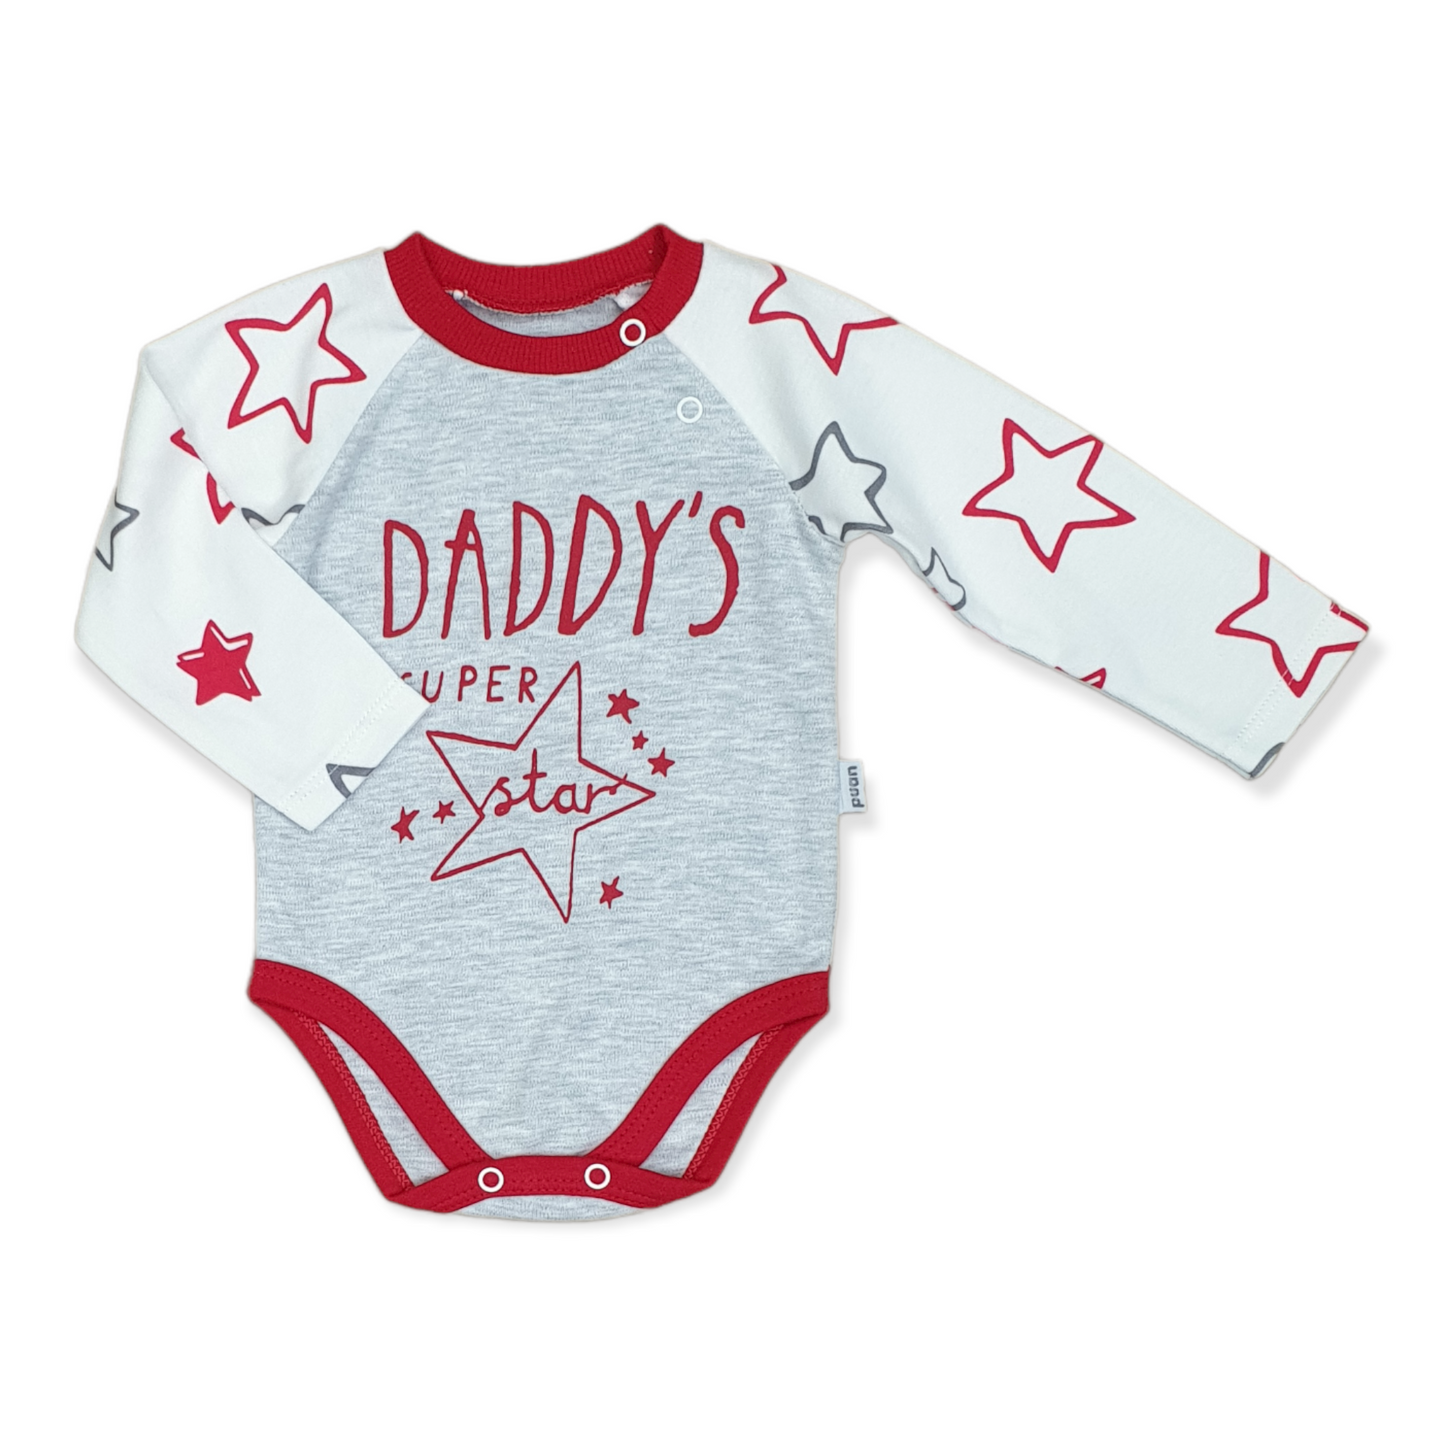 Puanbaby - Long Sleeve Daddy's Super Star Baby Girl Body